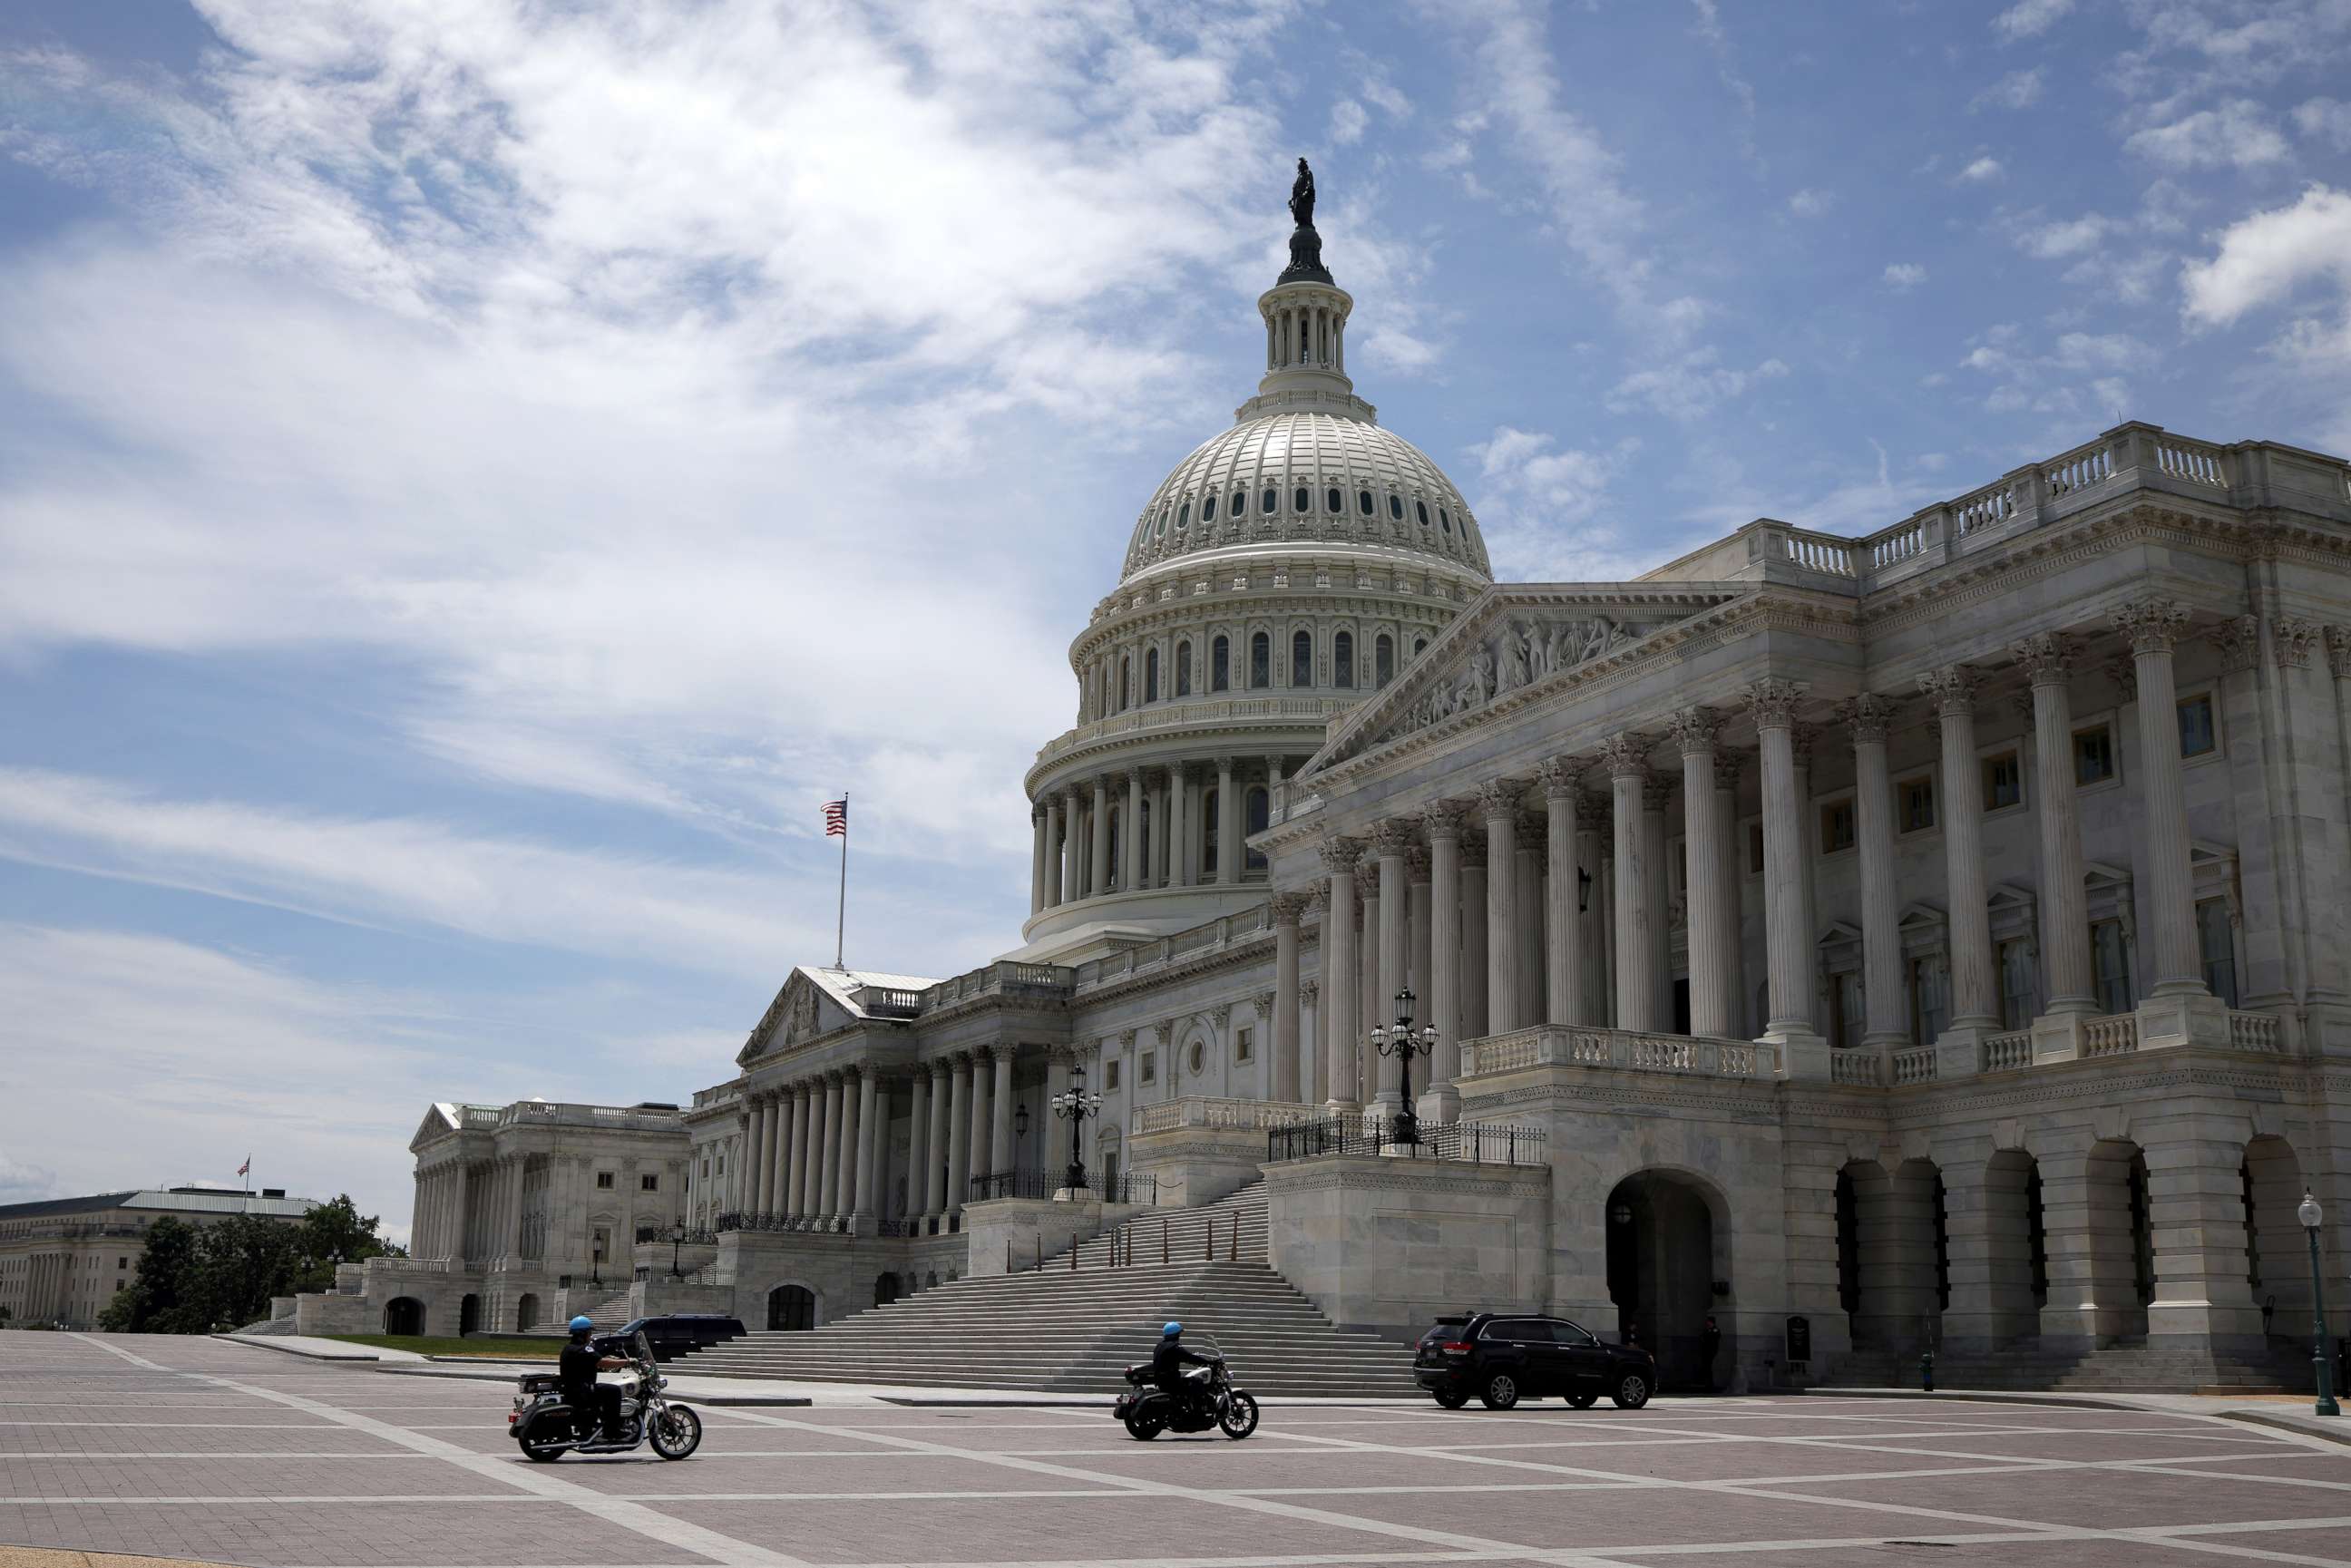 PHOTO: Capitol Police officers ride on motorcycles near the U.S. Capitol, June 1, 2021 in Washington, DC.